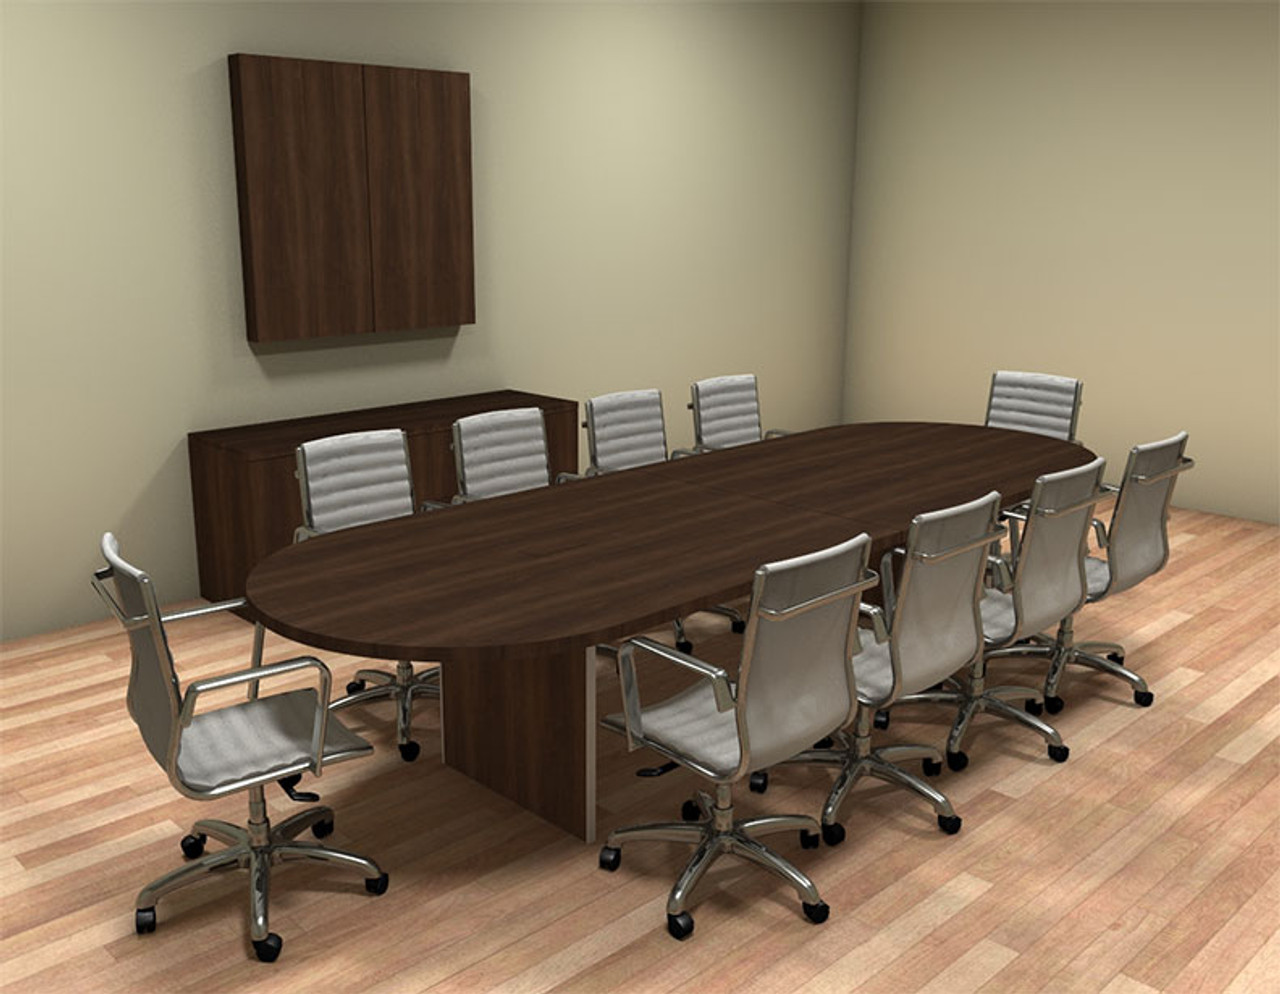 Modern Racetrack 12' Feet Conference Table, #CH-AMB-C21